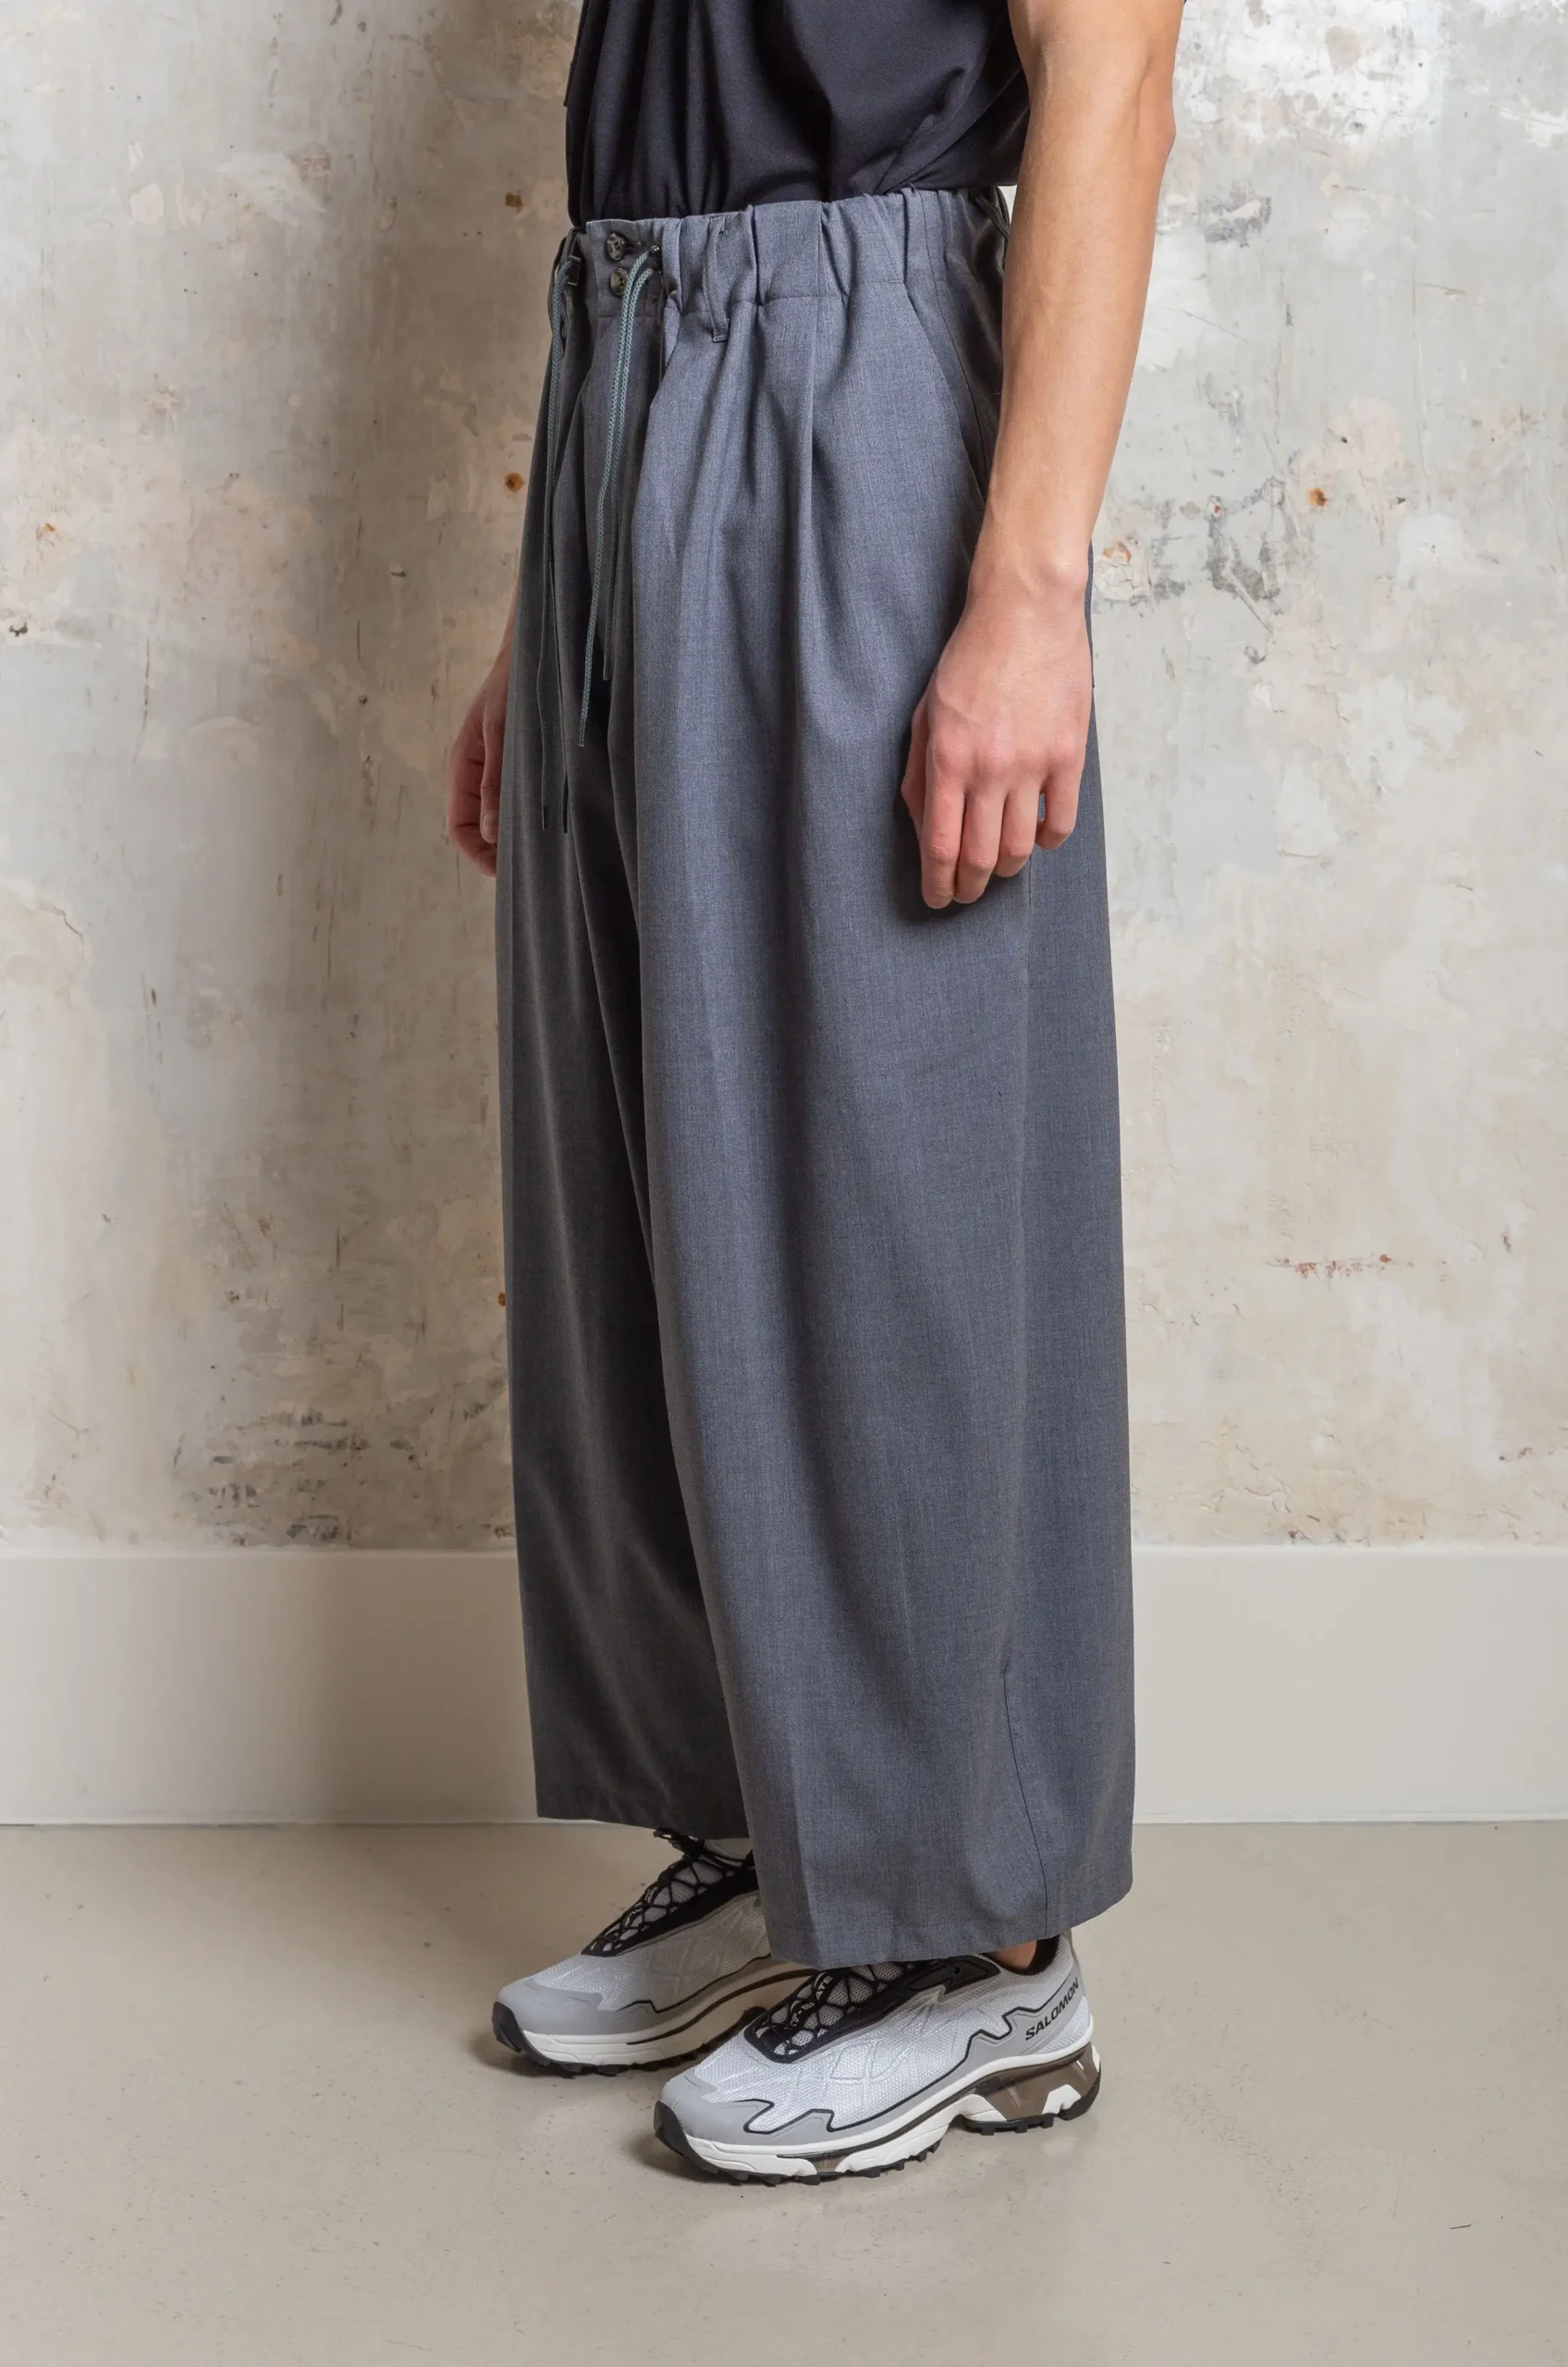 Sillage - Circular Pants Twill Gray - Rendez-vous Store